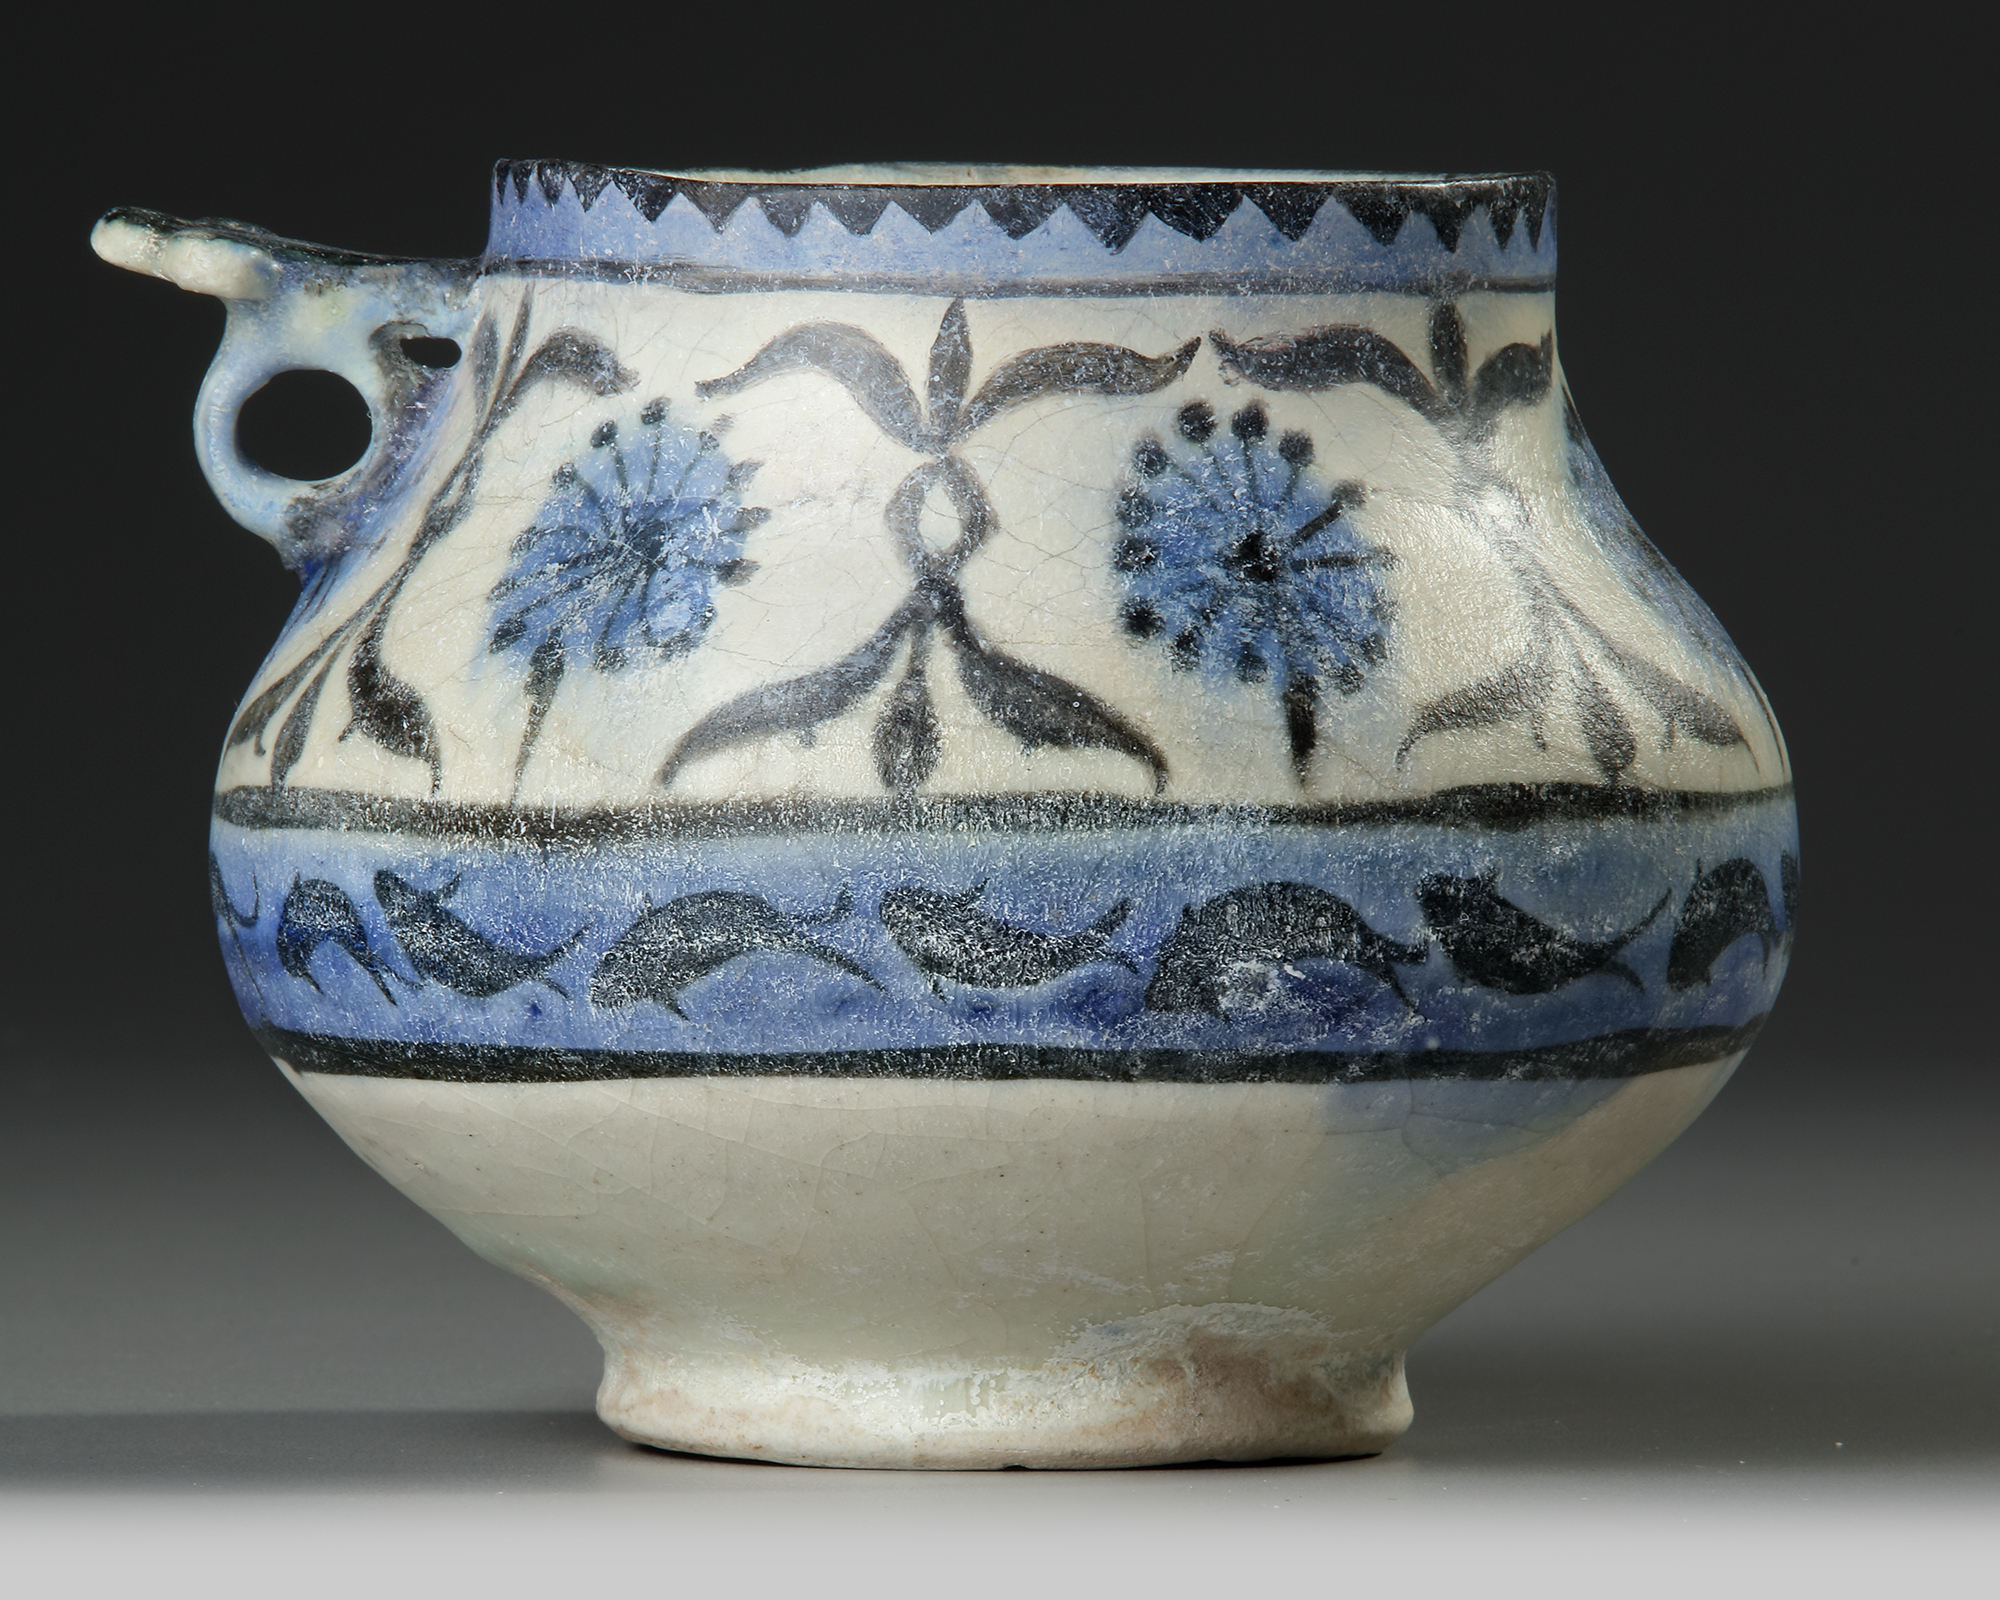 A KASHAN POTTERY JUG, PERSIA, EARLY 13TH CENTURY